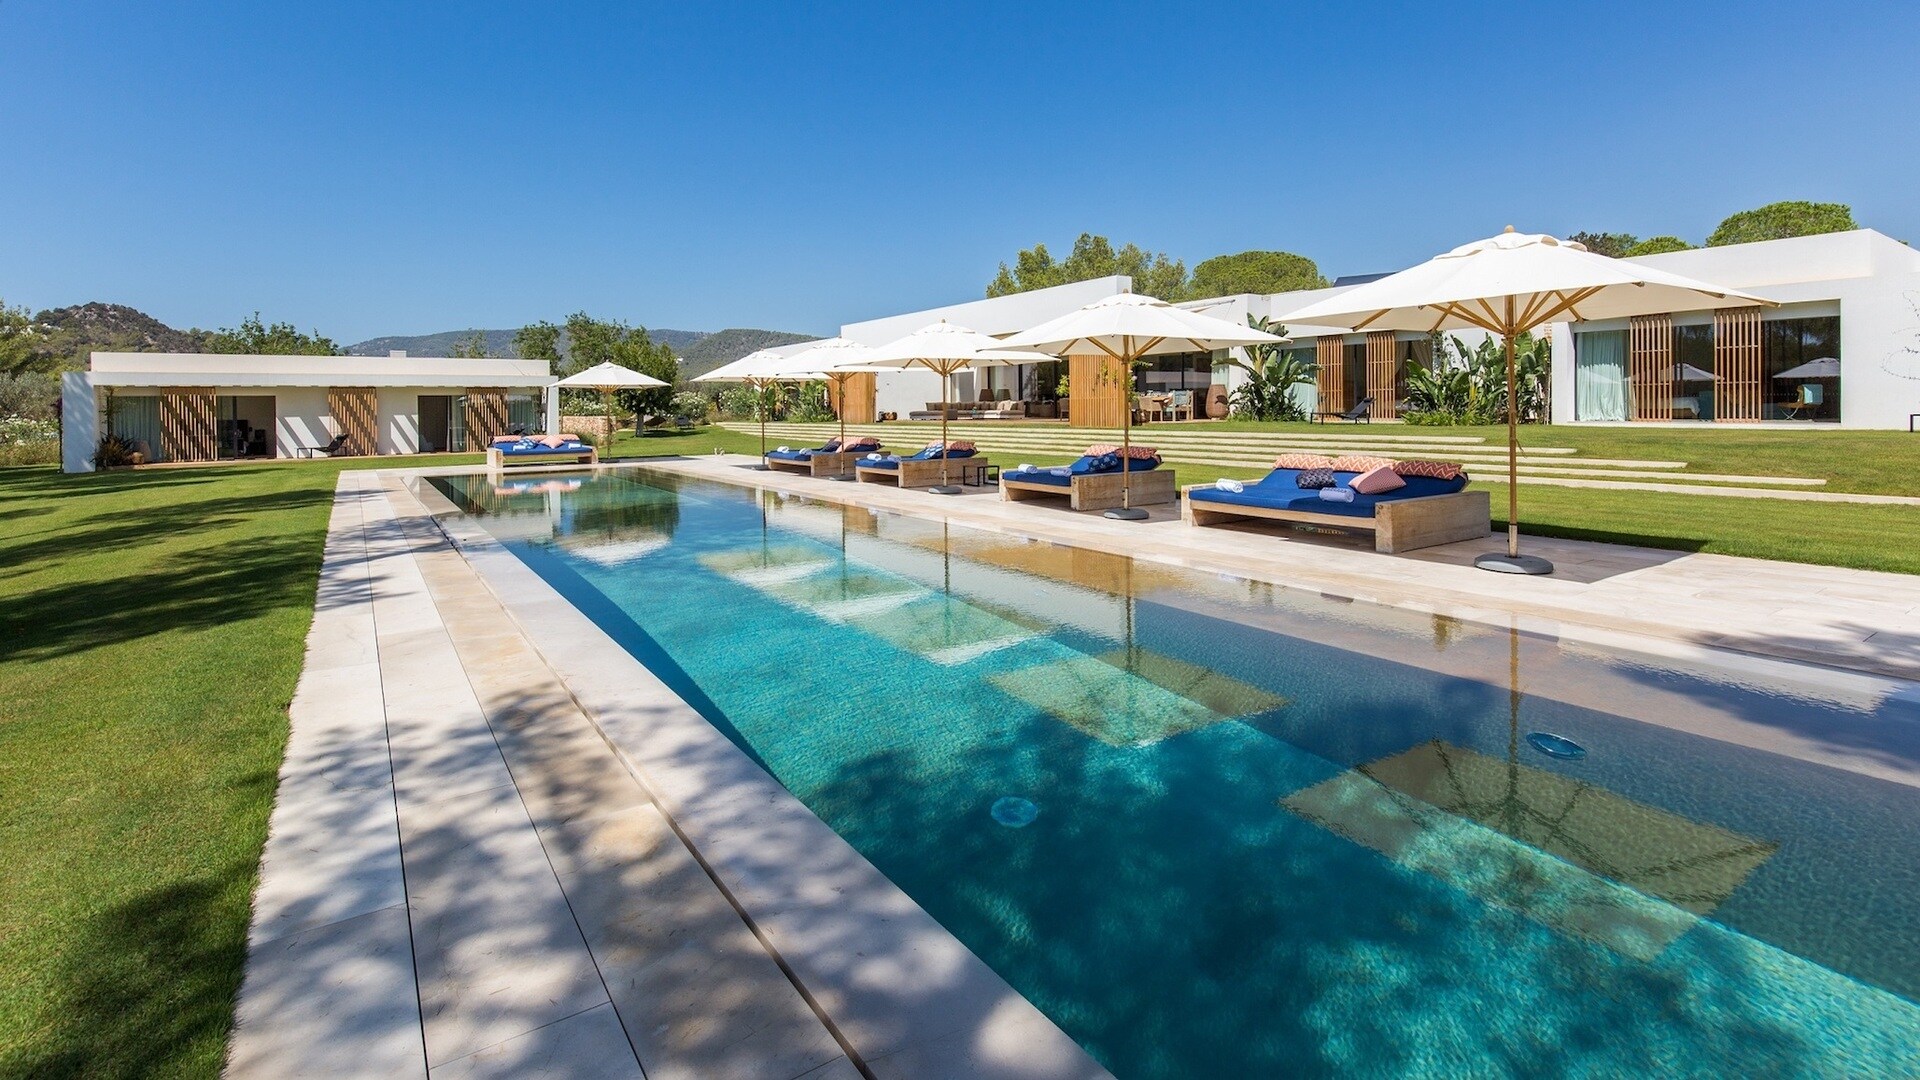 Property Image 2 - Rent this Luxury Villa with Private Pool, Ibiza Villa 1235